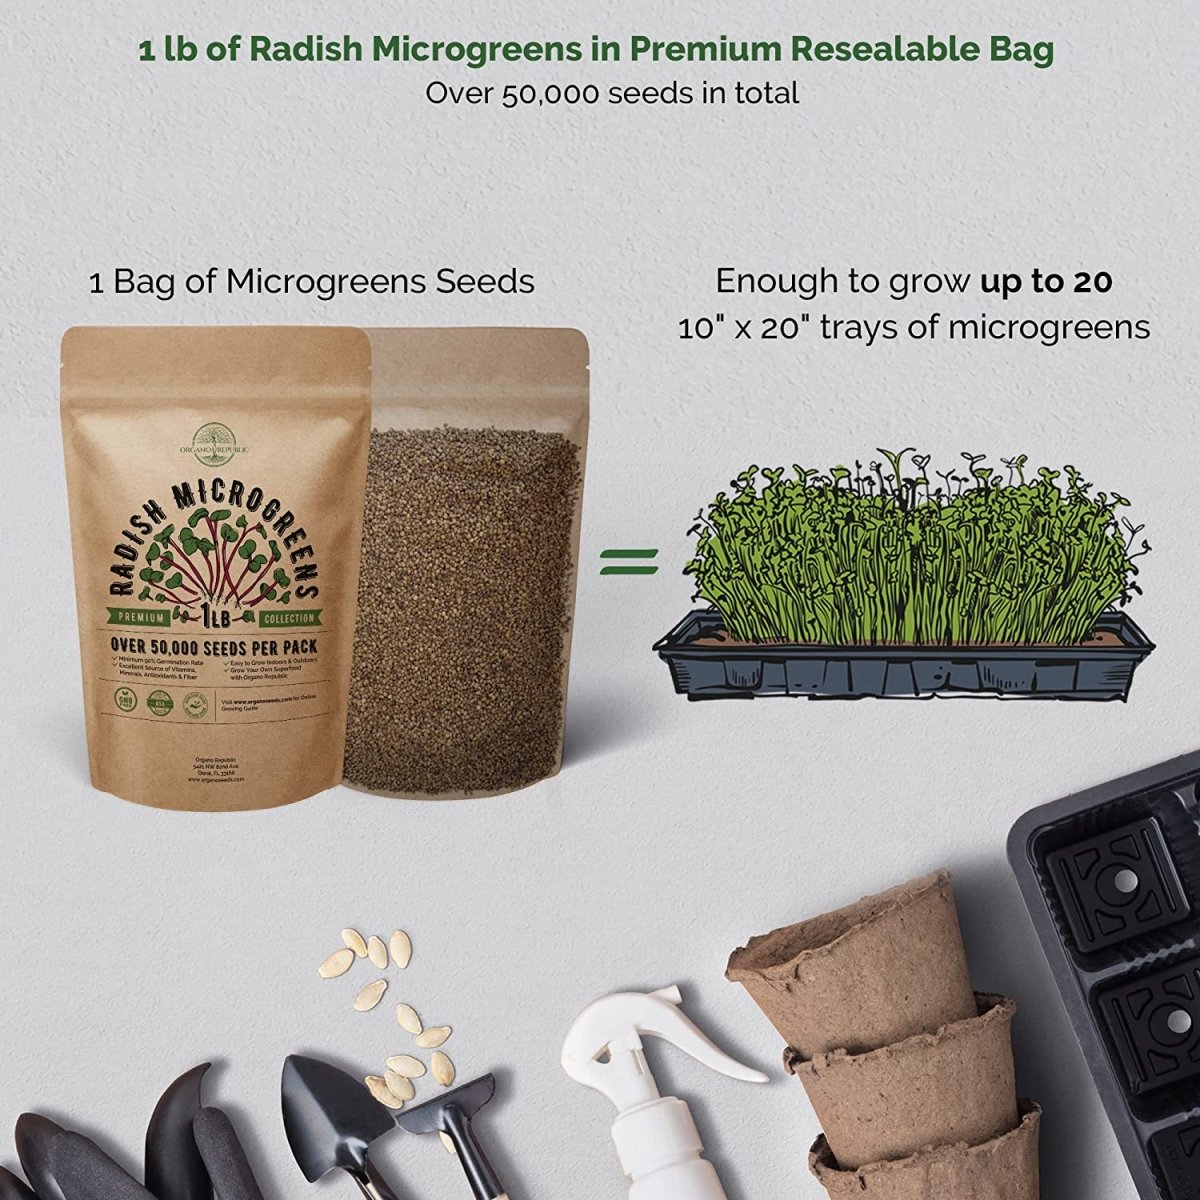 Radish Microgreen & 13 Rare Hot Chili Pepper Seeds Variety Packs Bundle Non-GMO Heirloom Seeds for Planting Indoor and Outdoor Over 50,600 Microgreen & Pepper Seeds in One Value Bundle - Organo Republic